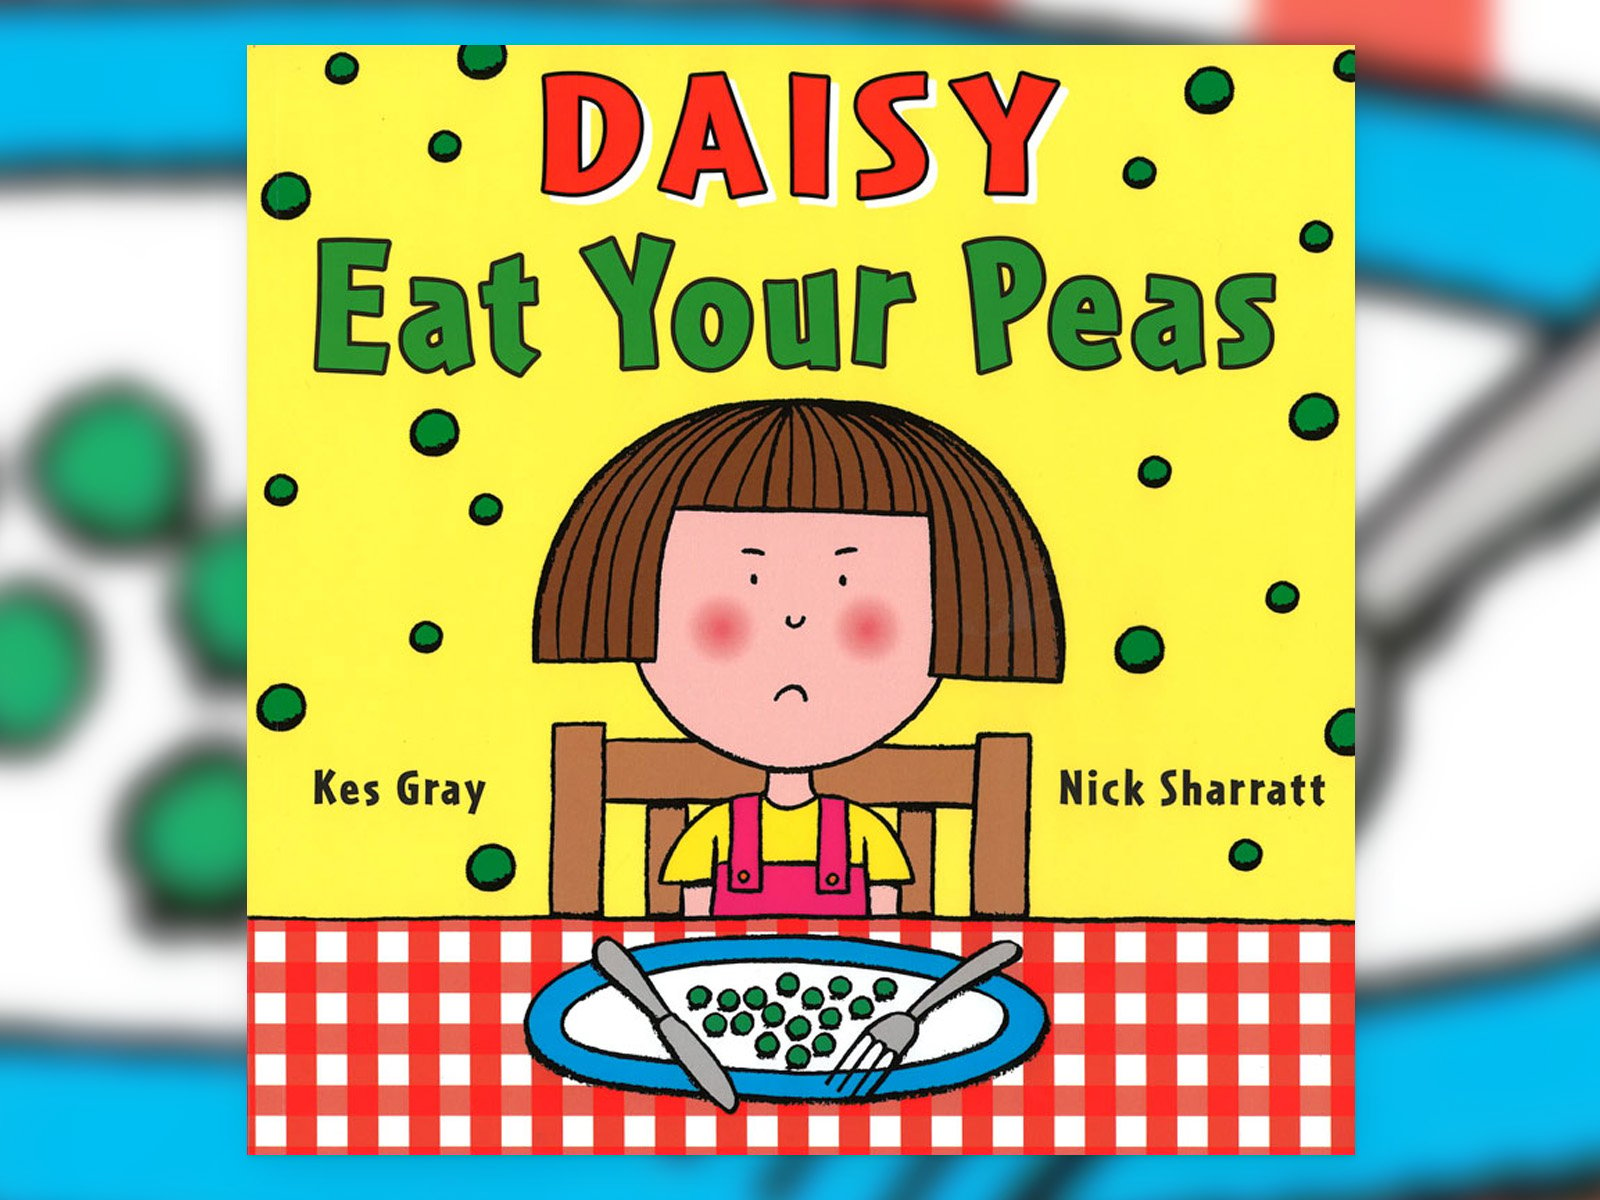 Daisy Eat Your Peas Book to Teach Persusaive Writing to Kids